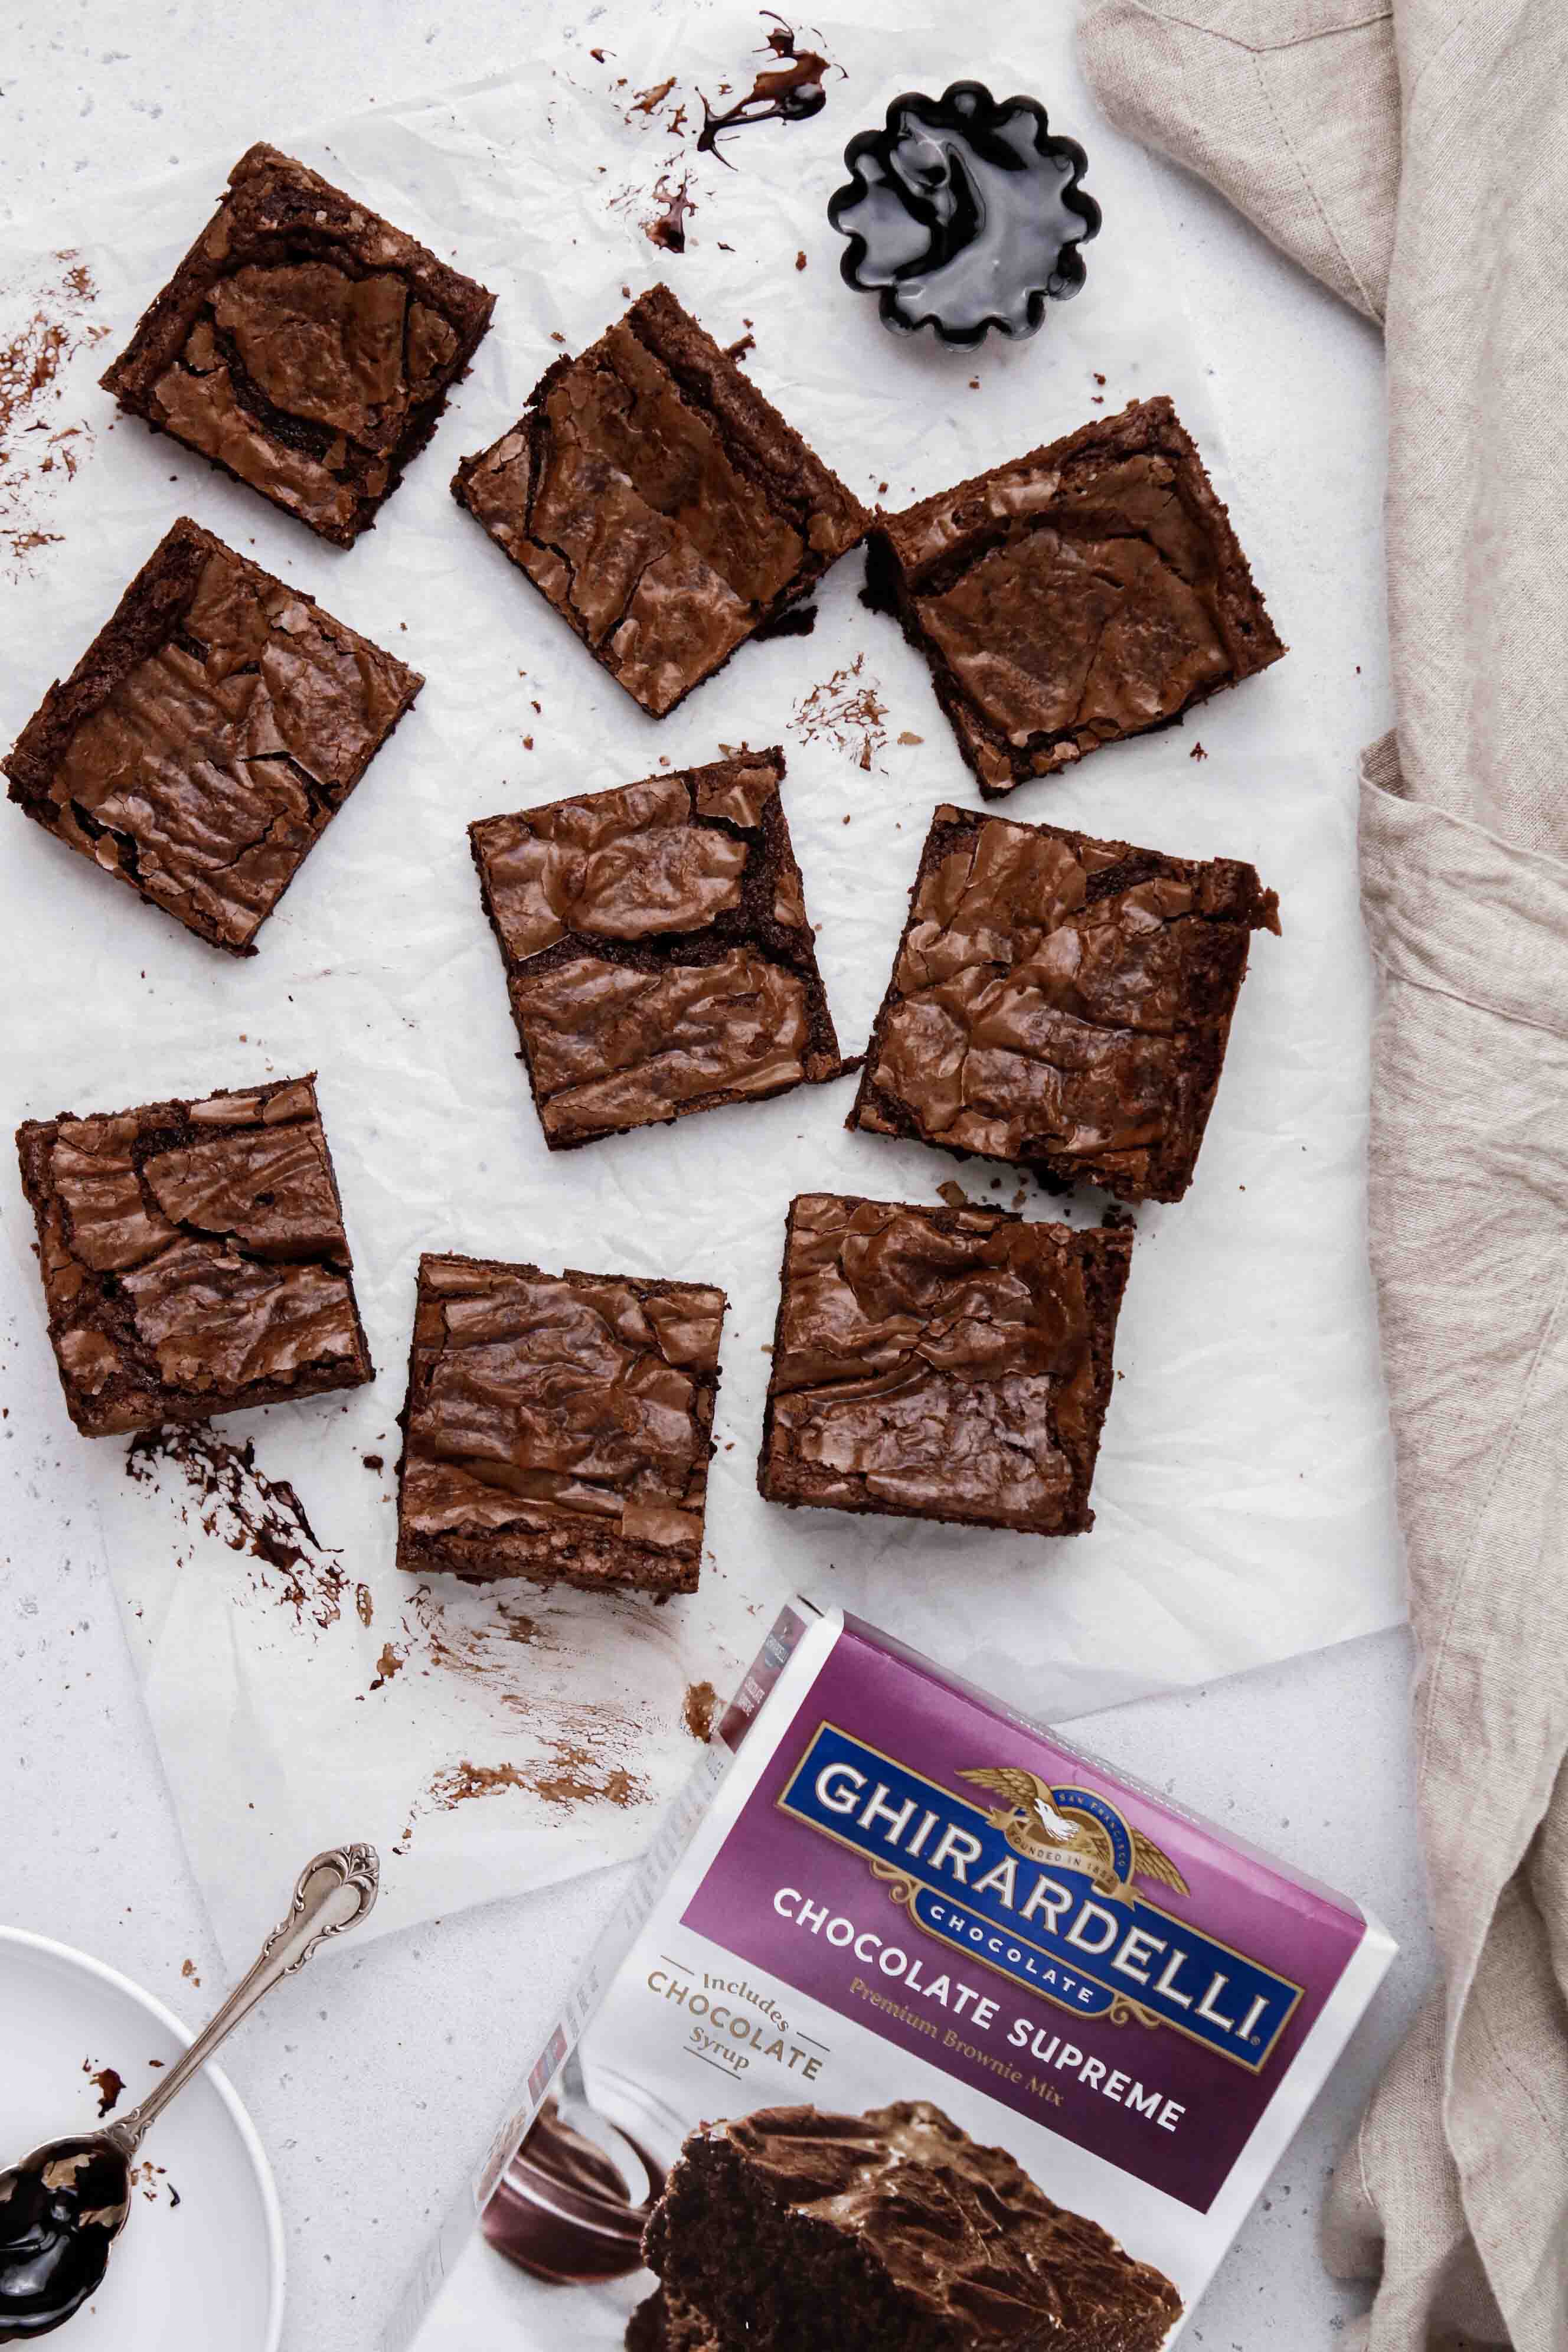 Ghirardelli boxed brownies better